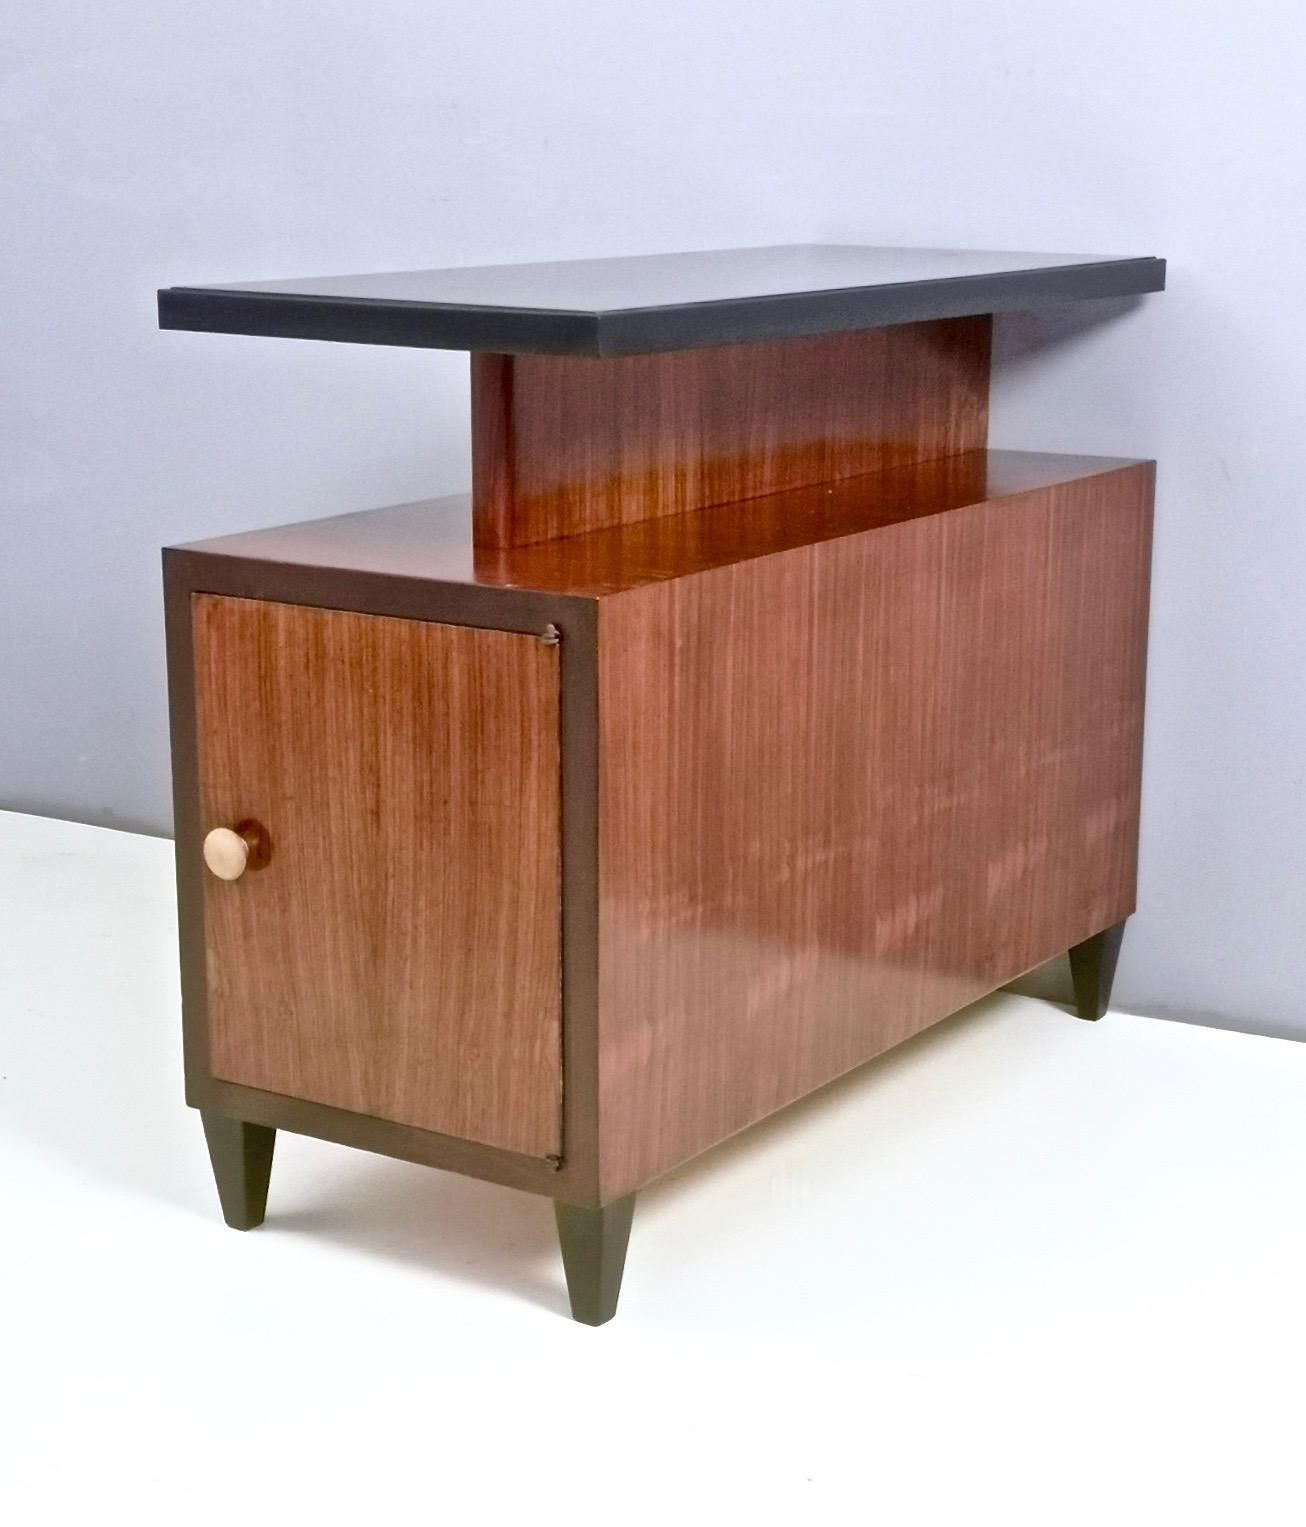 It is made in mahogany and features mahogany interiors, ebonized beech parts and a brass handle.
This is a vintage item, therefore it might show slight traces of use, but it has been perfectly restored and can be considered as in excellent